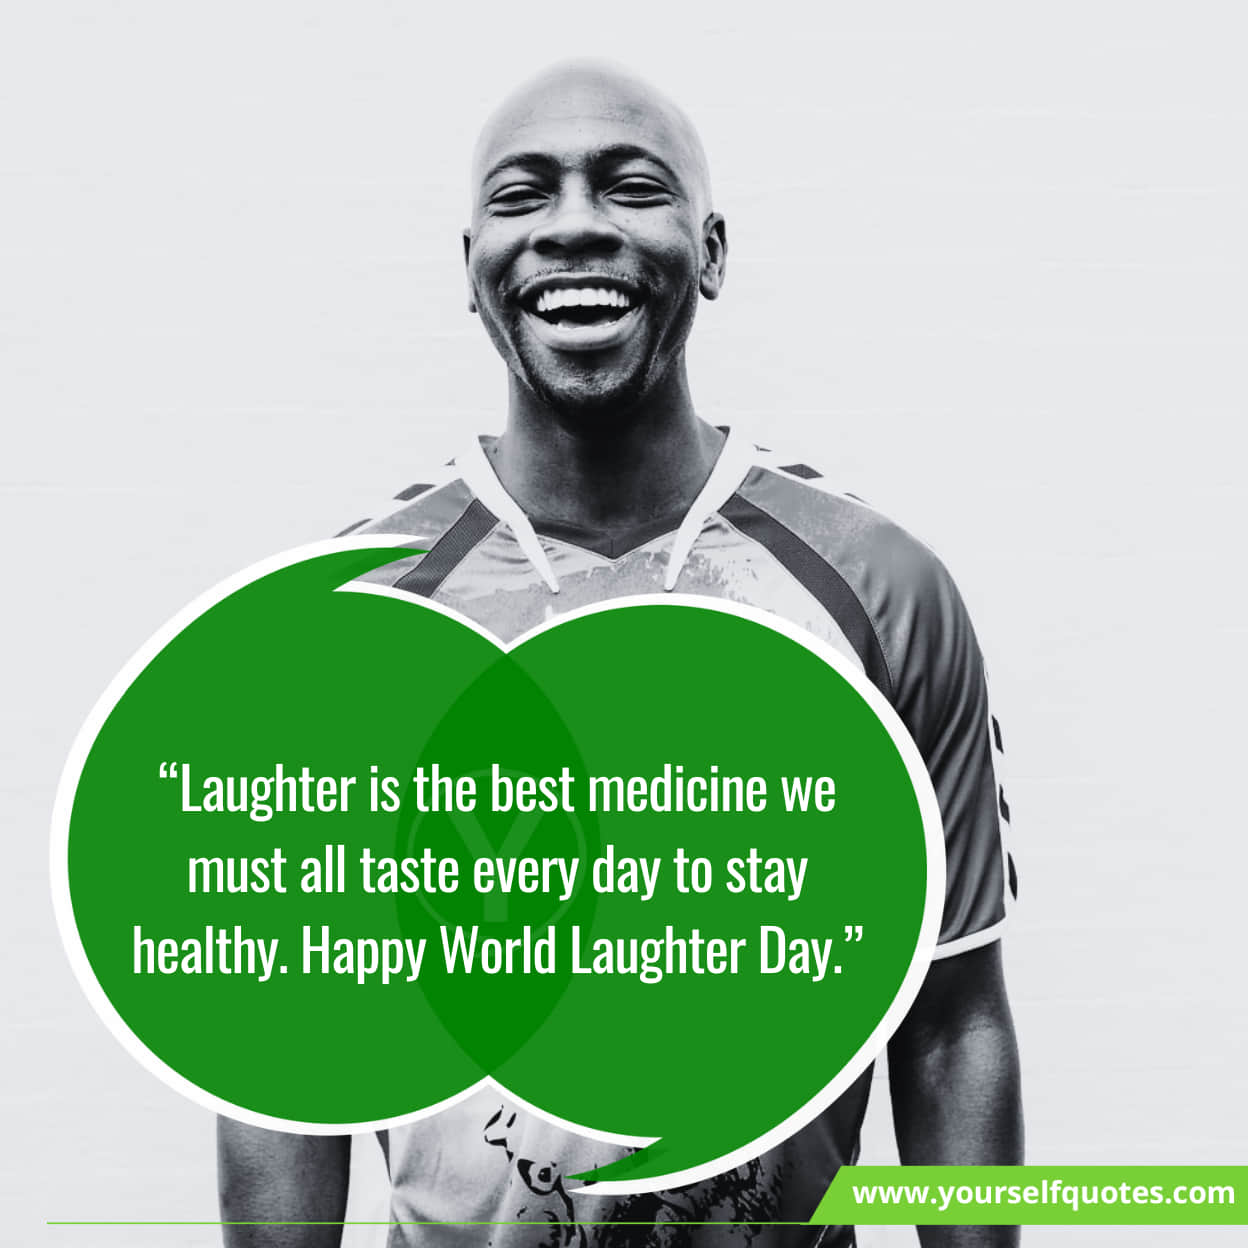 World Laughter Day Wishes